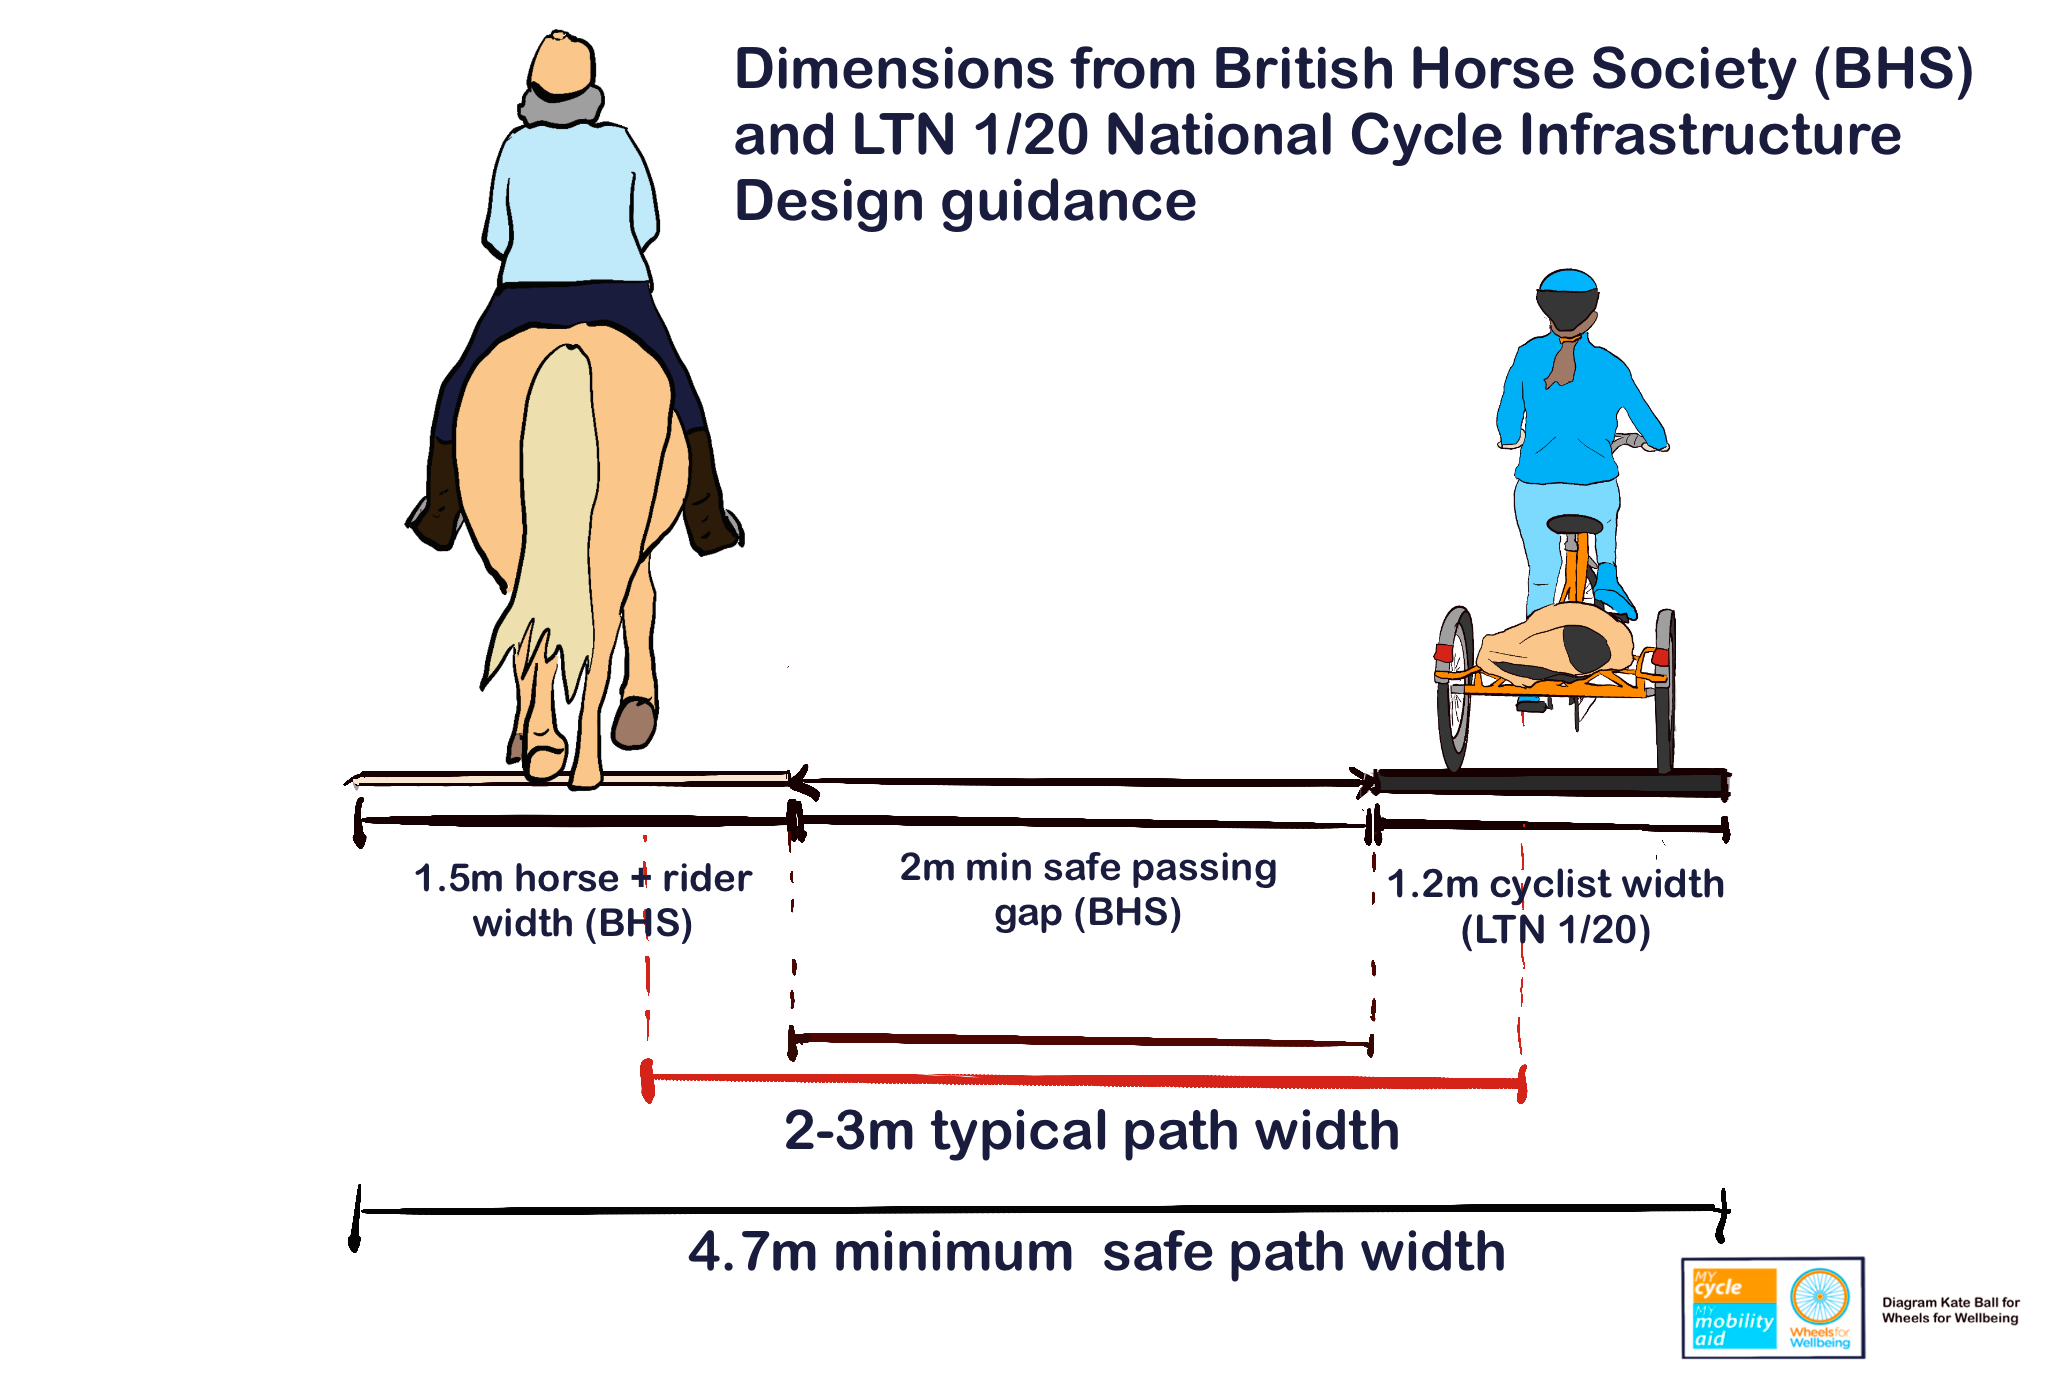 Diagram shows from left to right a horse rider with 1.5m width (BHS), a 2m minimum safe passing gap (BHS), a 1.2m cyclist width (tricyclist shown is 0.8m wide - LTN 1/20 Cycle Design Vehicle is 1.2m wide, comparable to a side-by-side tandem). Top right, label reads "dimensions from British Horse Society (BHS) and LTN 1/20 national Cycle Infrastructure Design guidance Below, labels show a 2-3m typical path width and the 4.7m minimum safe path width.